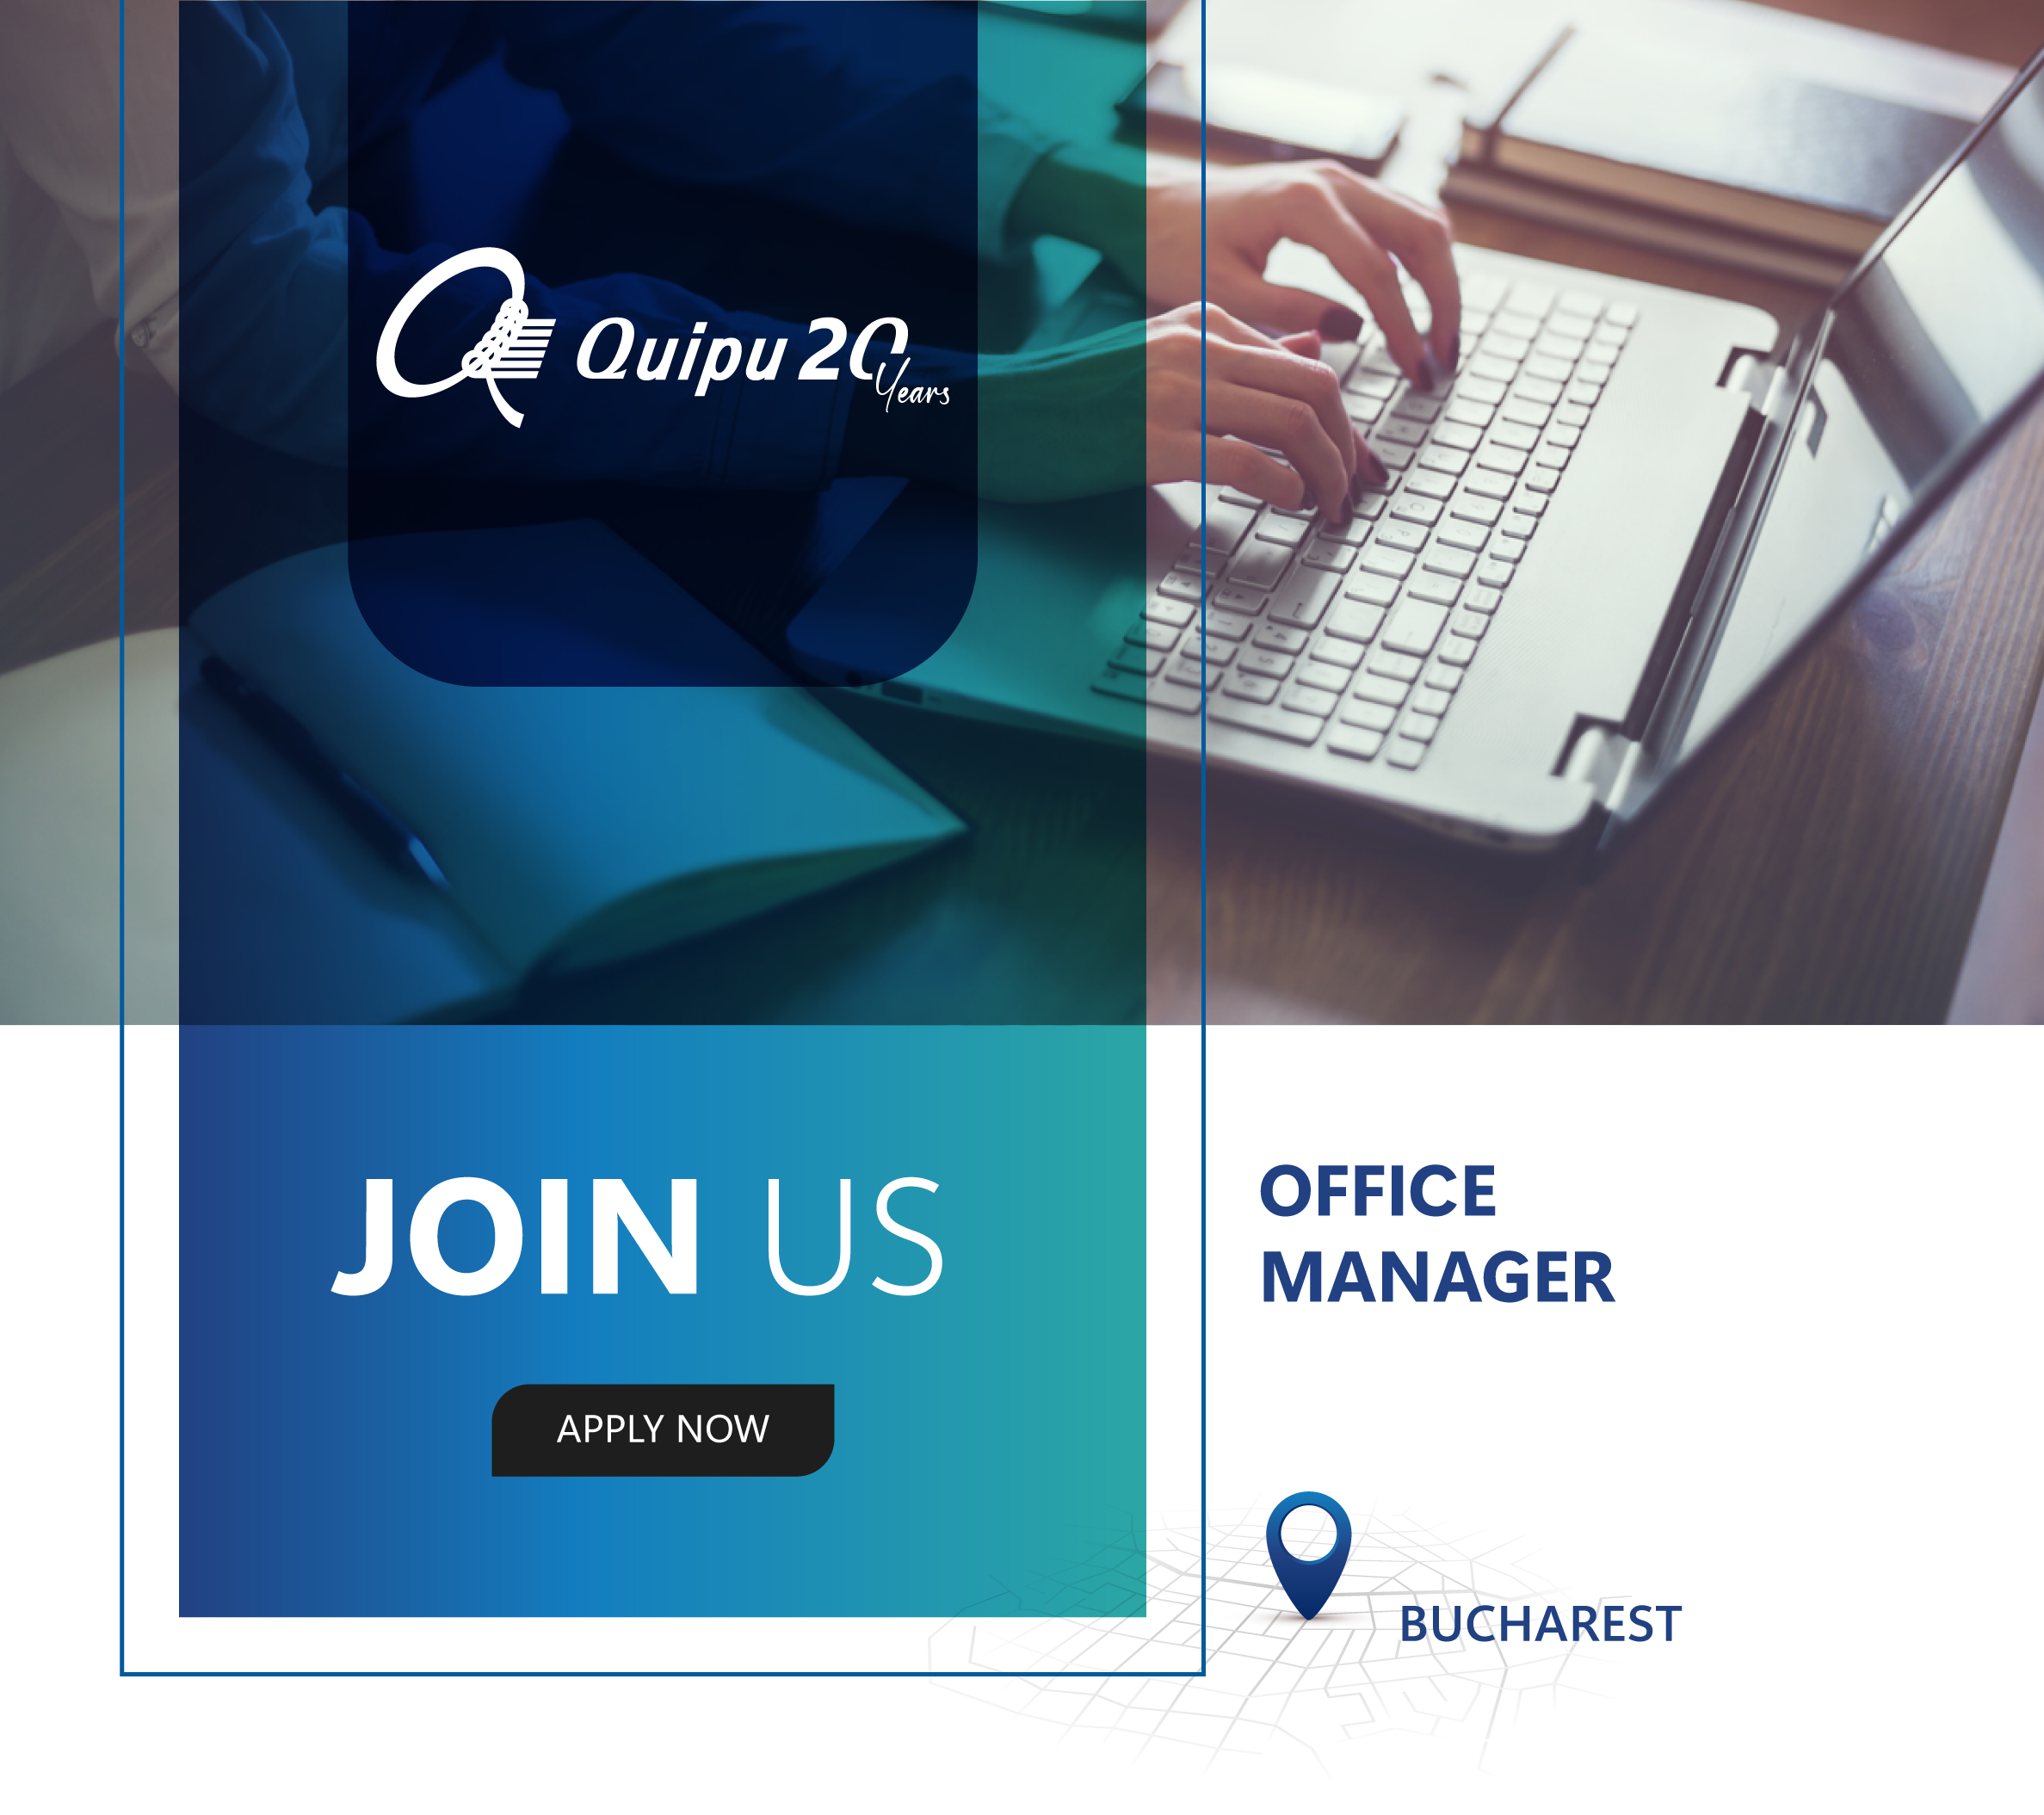 Office Manager – Bucharest